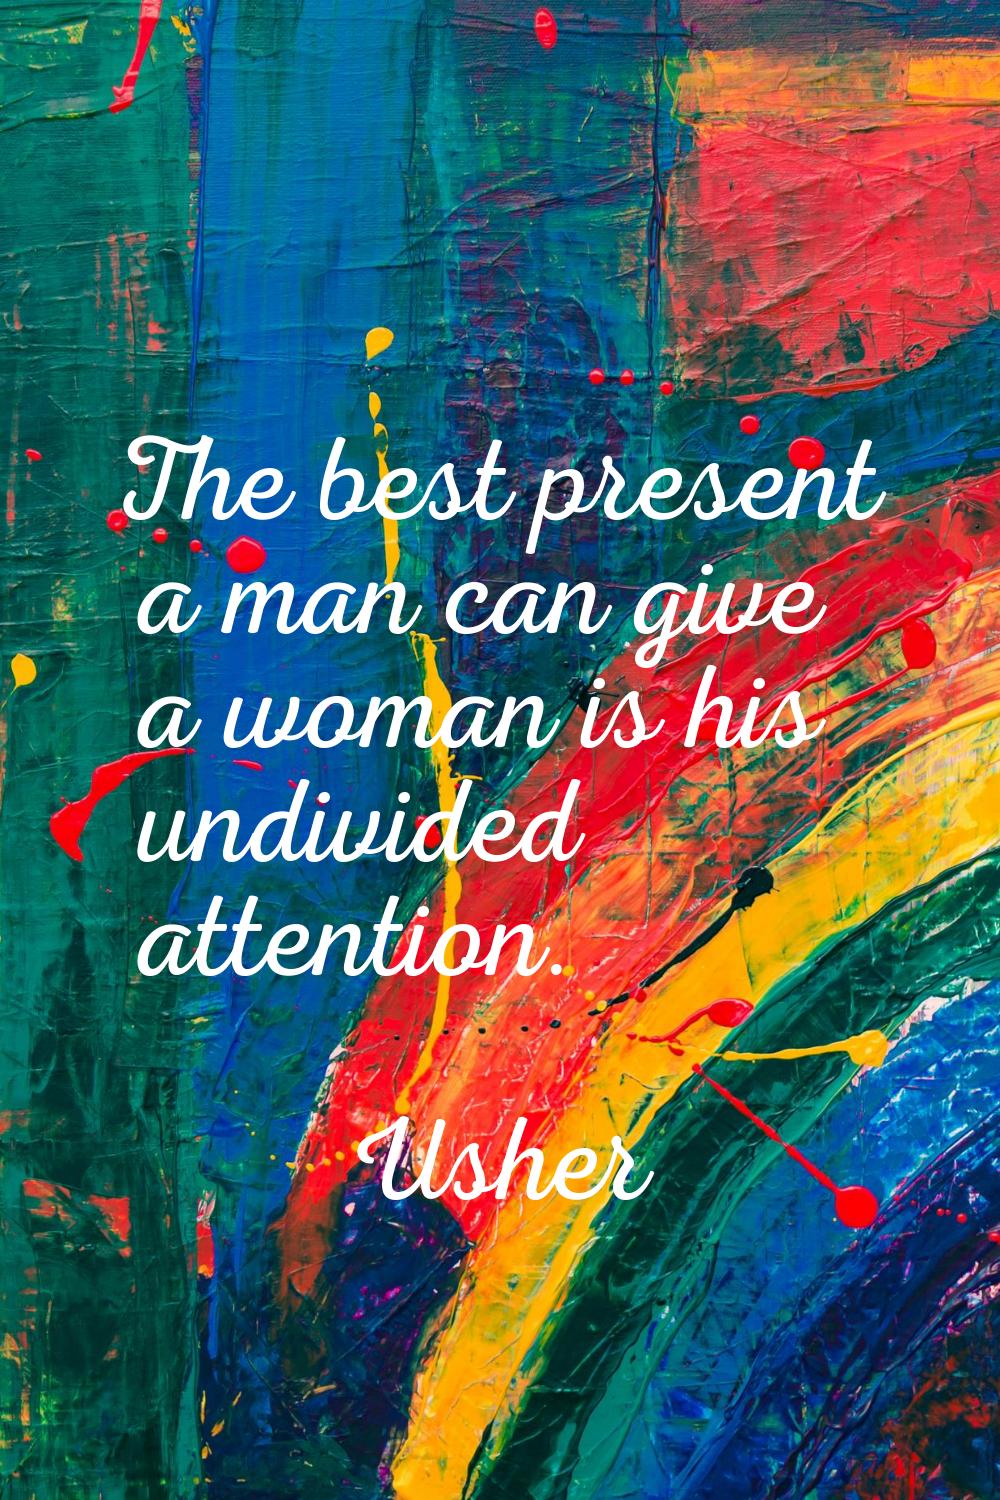 The best present a man can give a woman is his undivided attention.